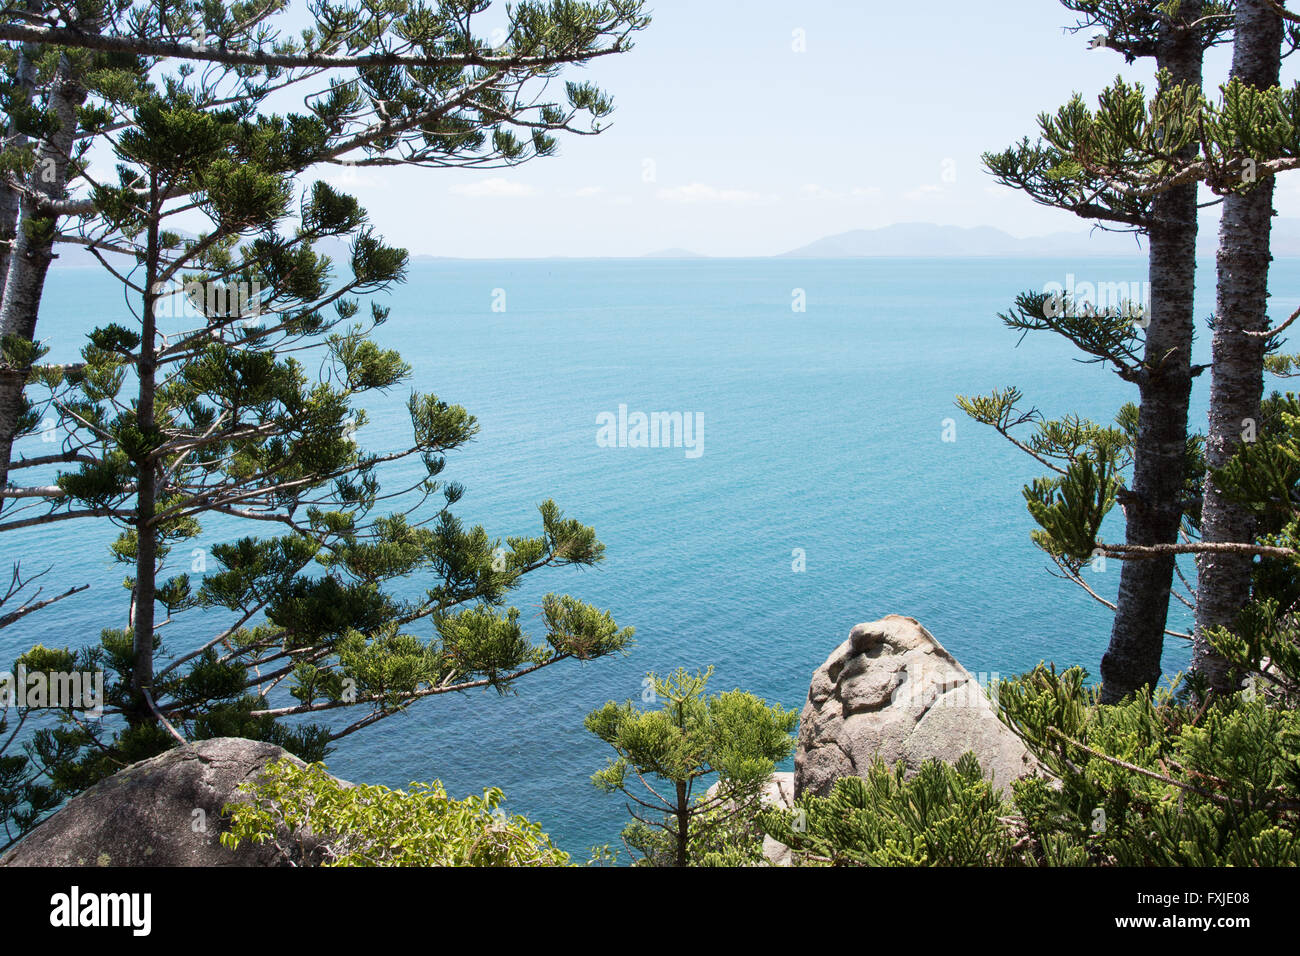 Blue sea framed by Araucaria Cunninghamii pines or hoop pines on tropical Magnetic Island, Queensland, Australia Stock Photo